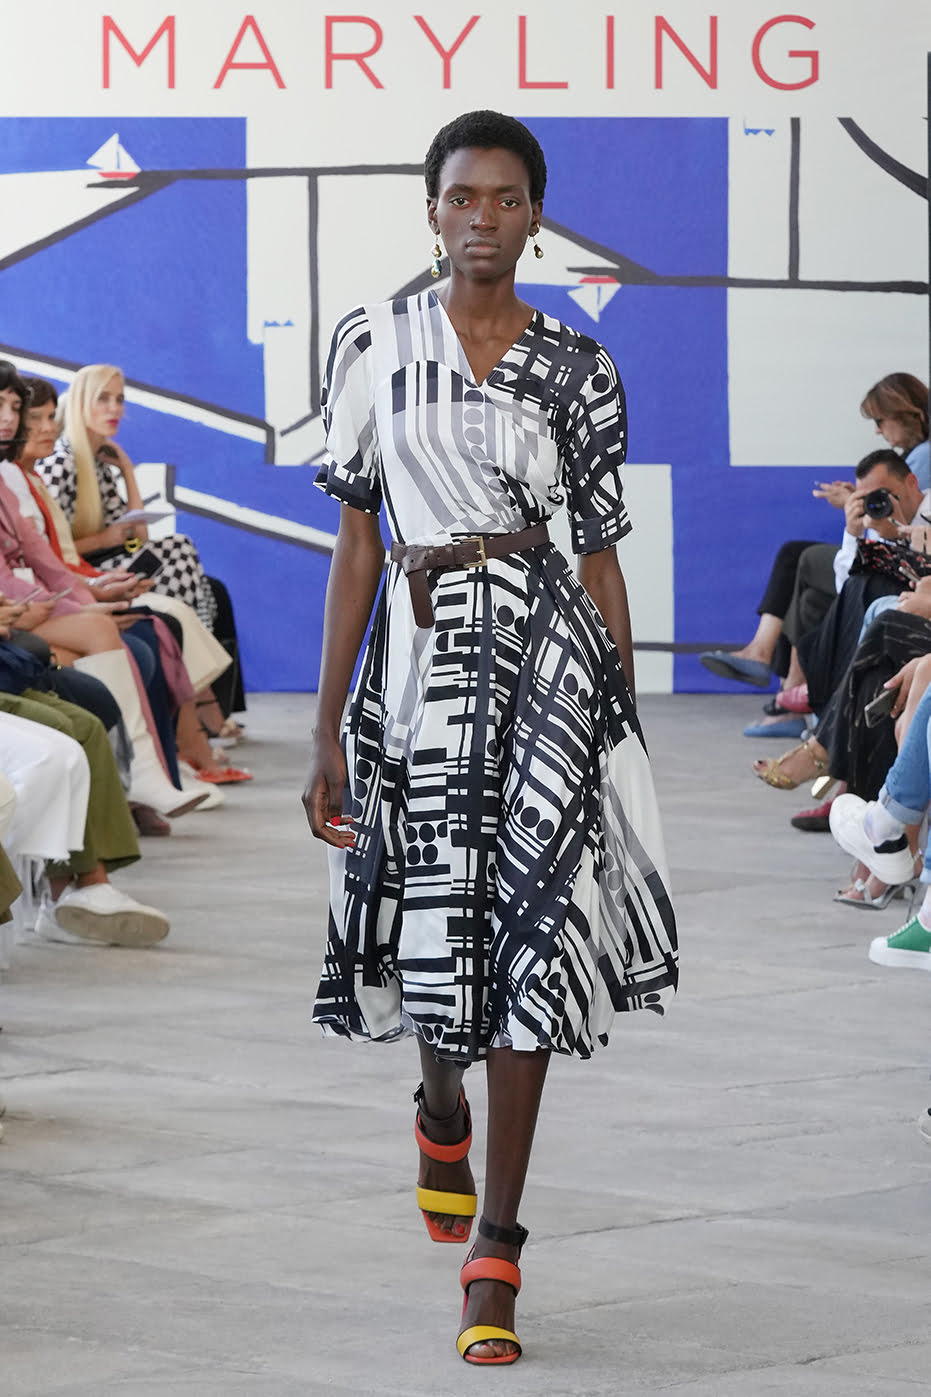 MARYLING’s Spring/Summer 2022 collection reinterprets the nautical mood ...